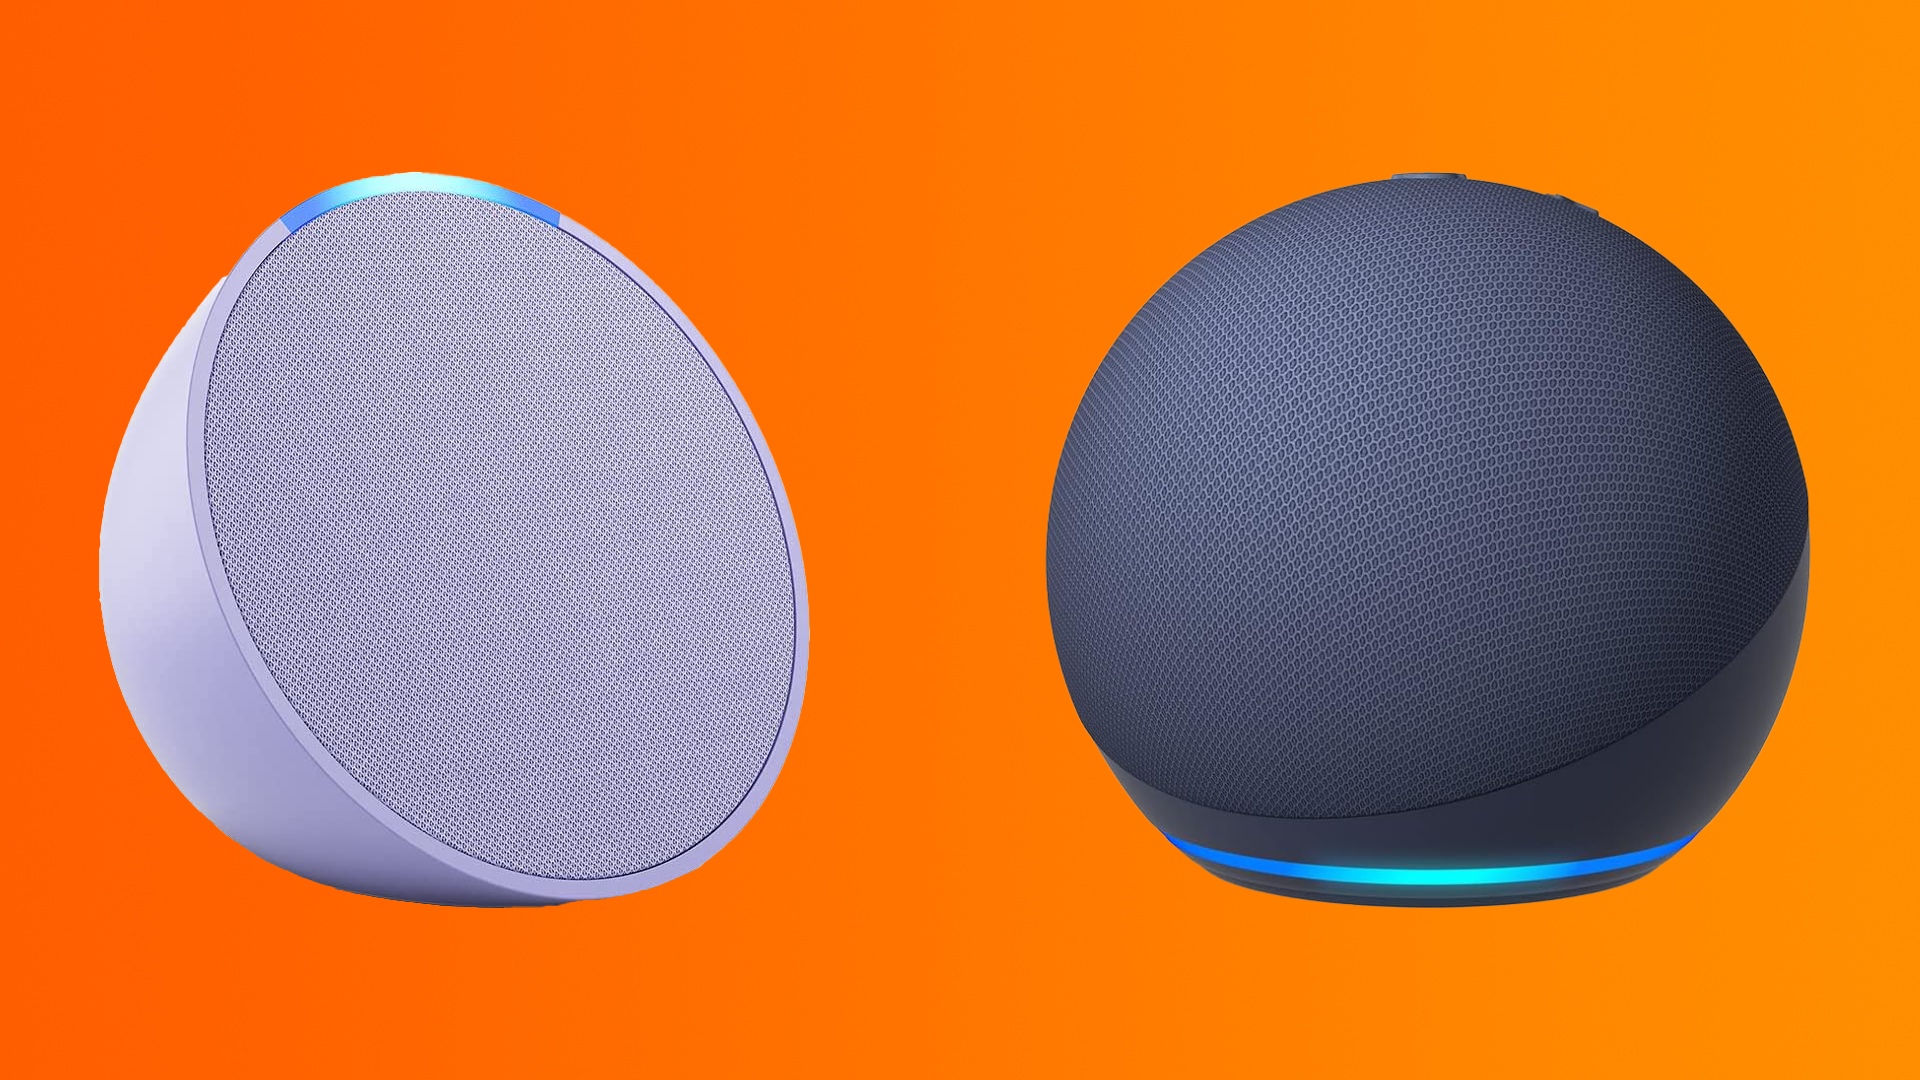 Echo Pop vs. Echo Dot: What's the Difference?